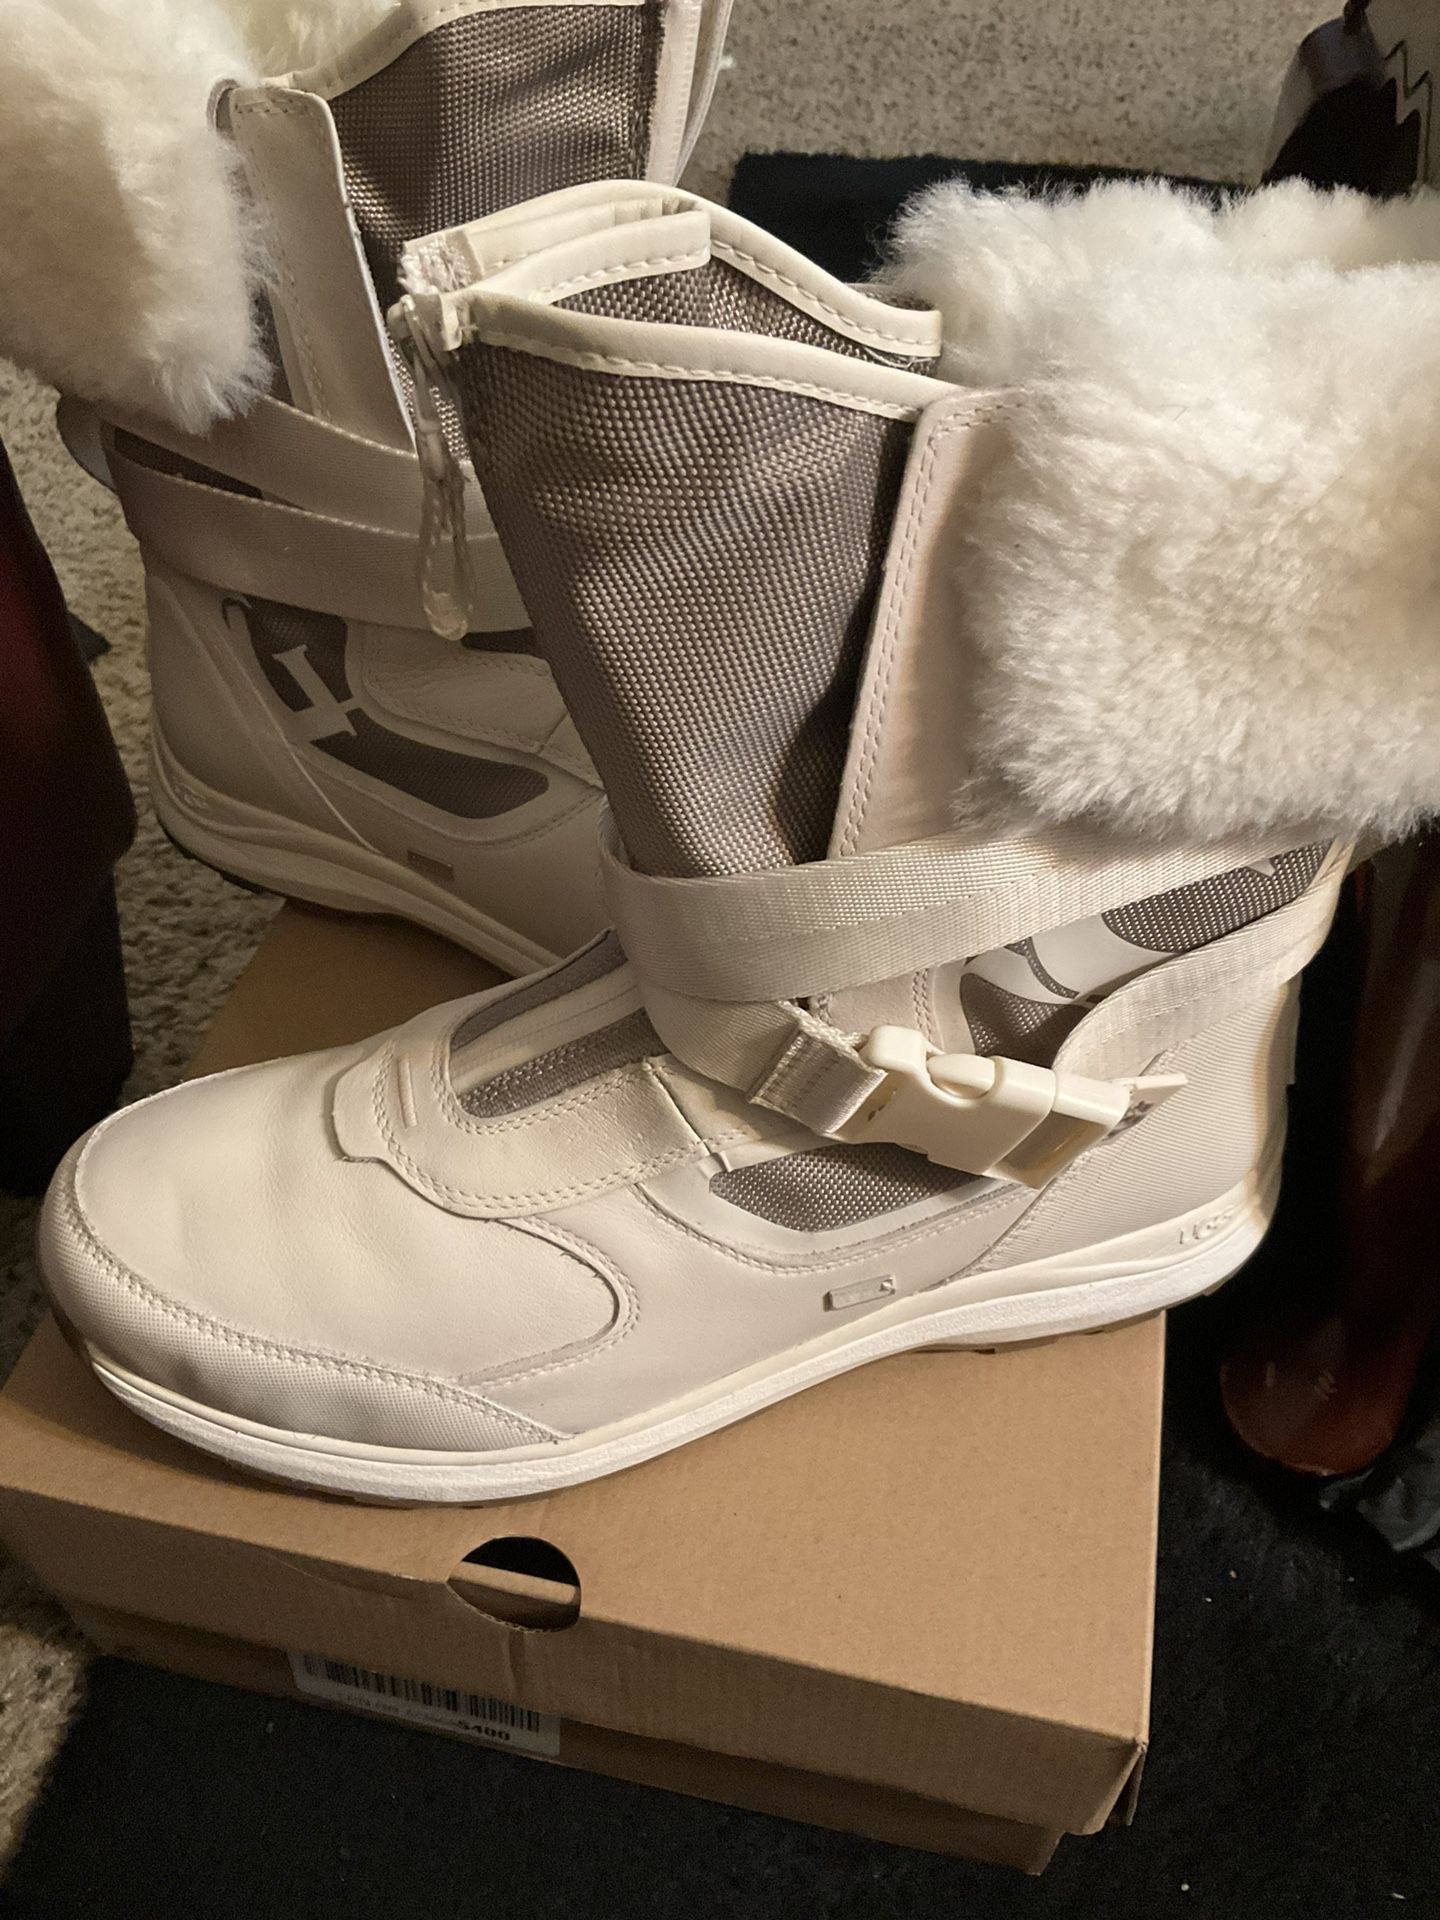 OFF WHITE UGG BOOTS